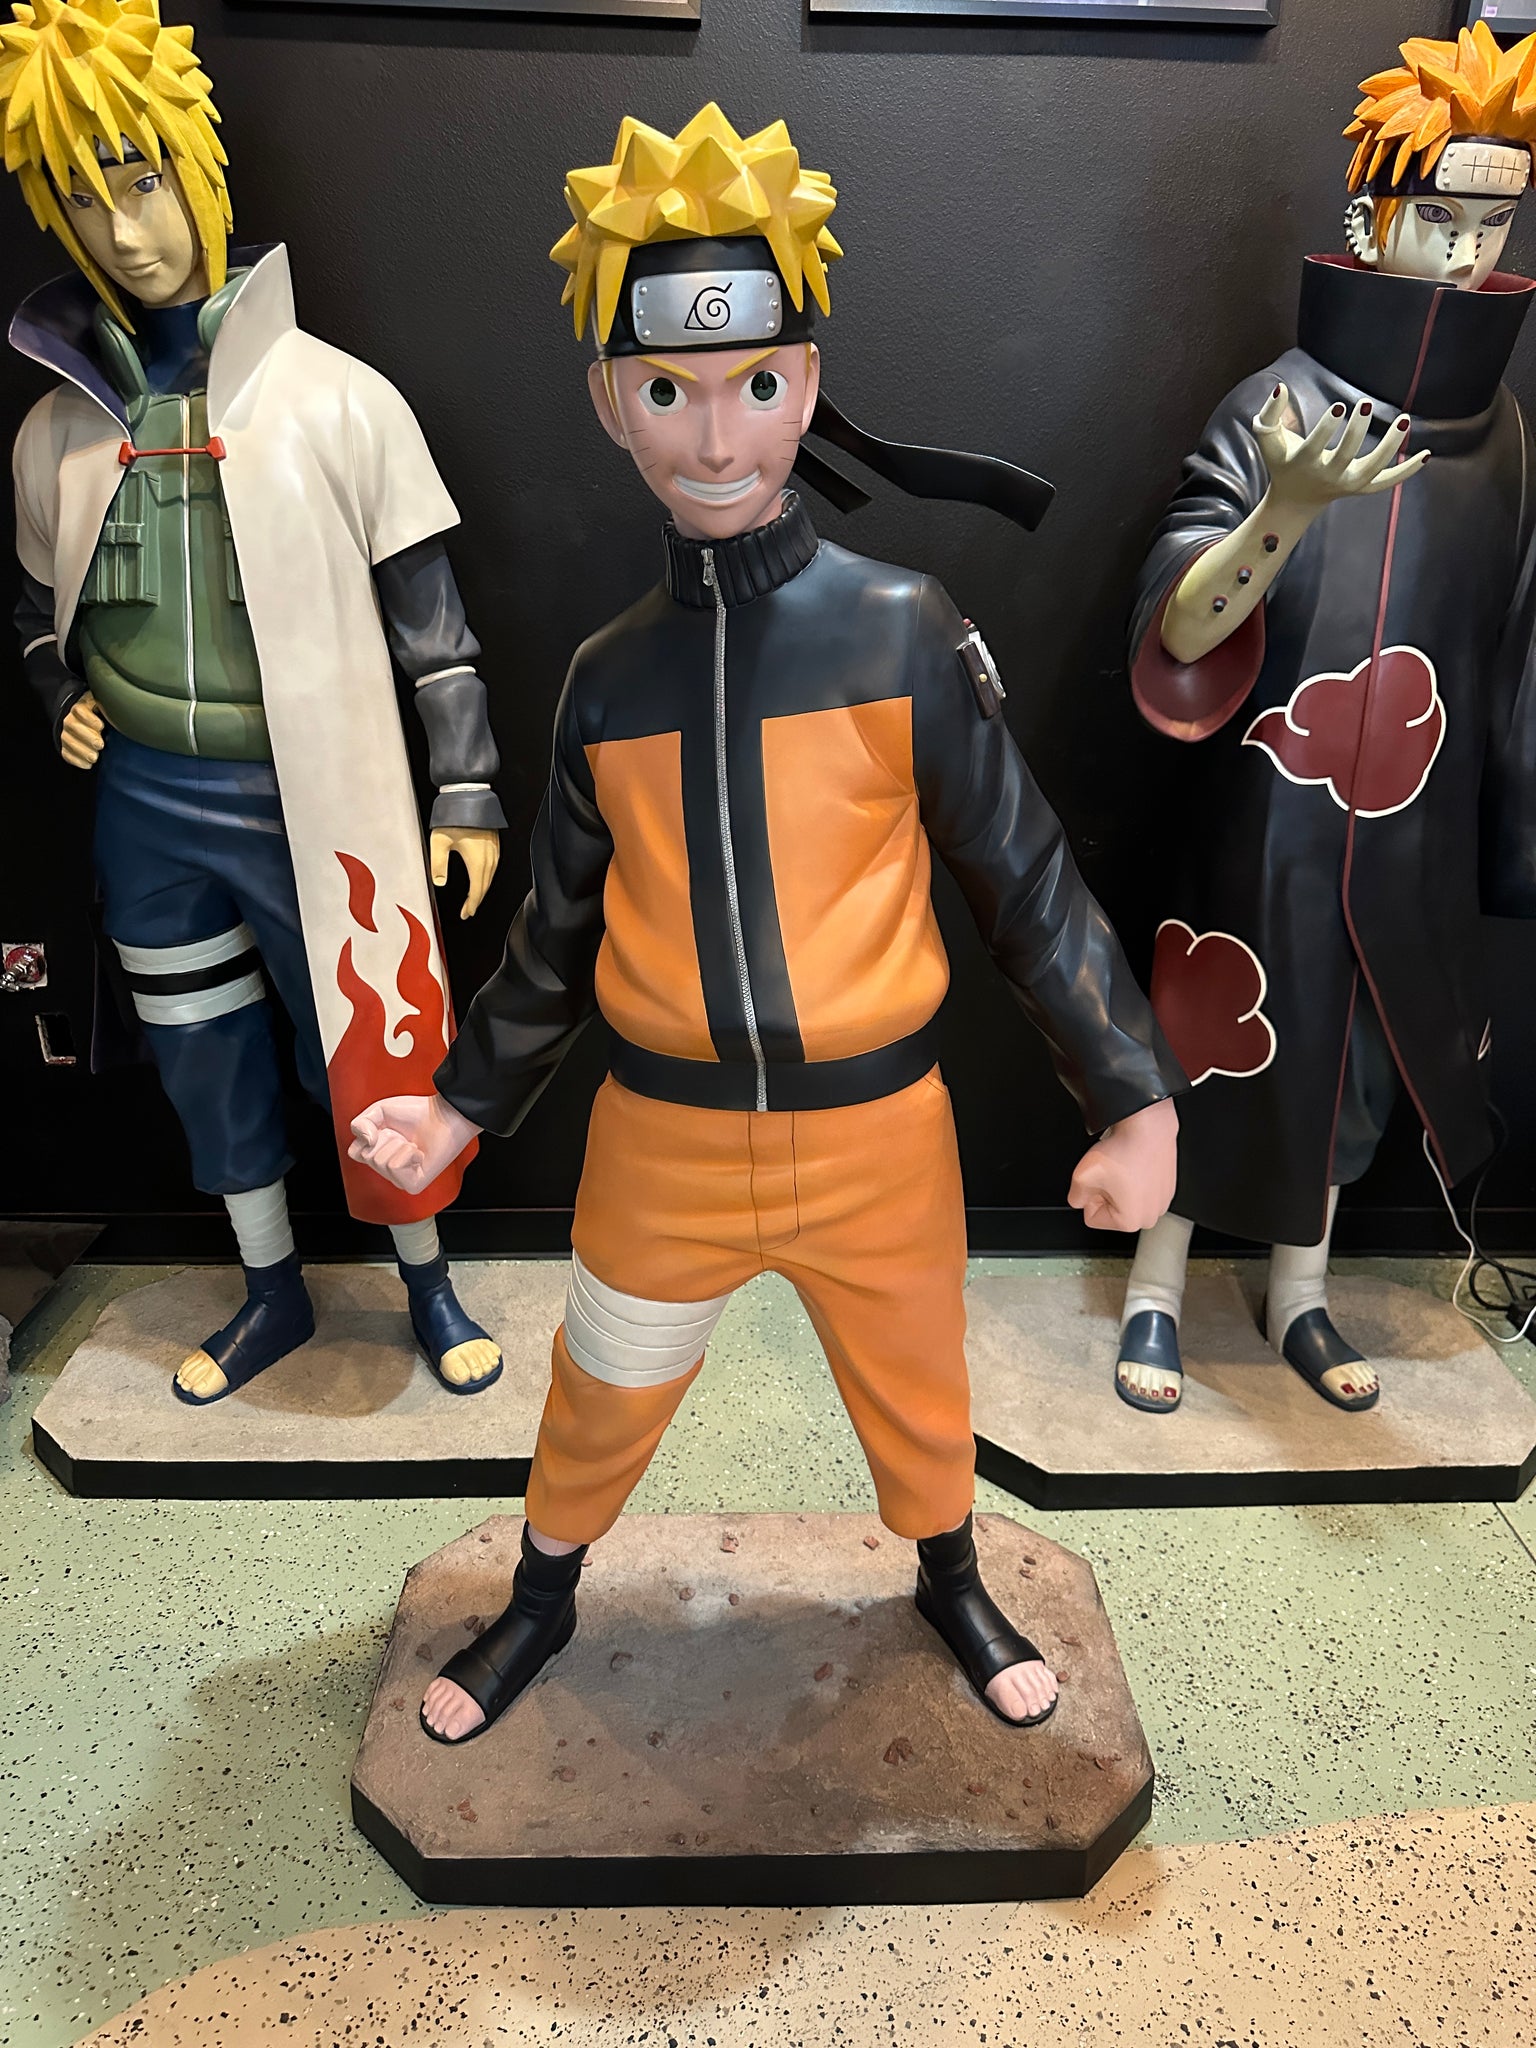 Beijing Mall Holds Exhibit of Bad LifeSize Naruto One Piece Characters   Interest  Anime News Network